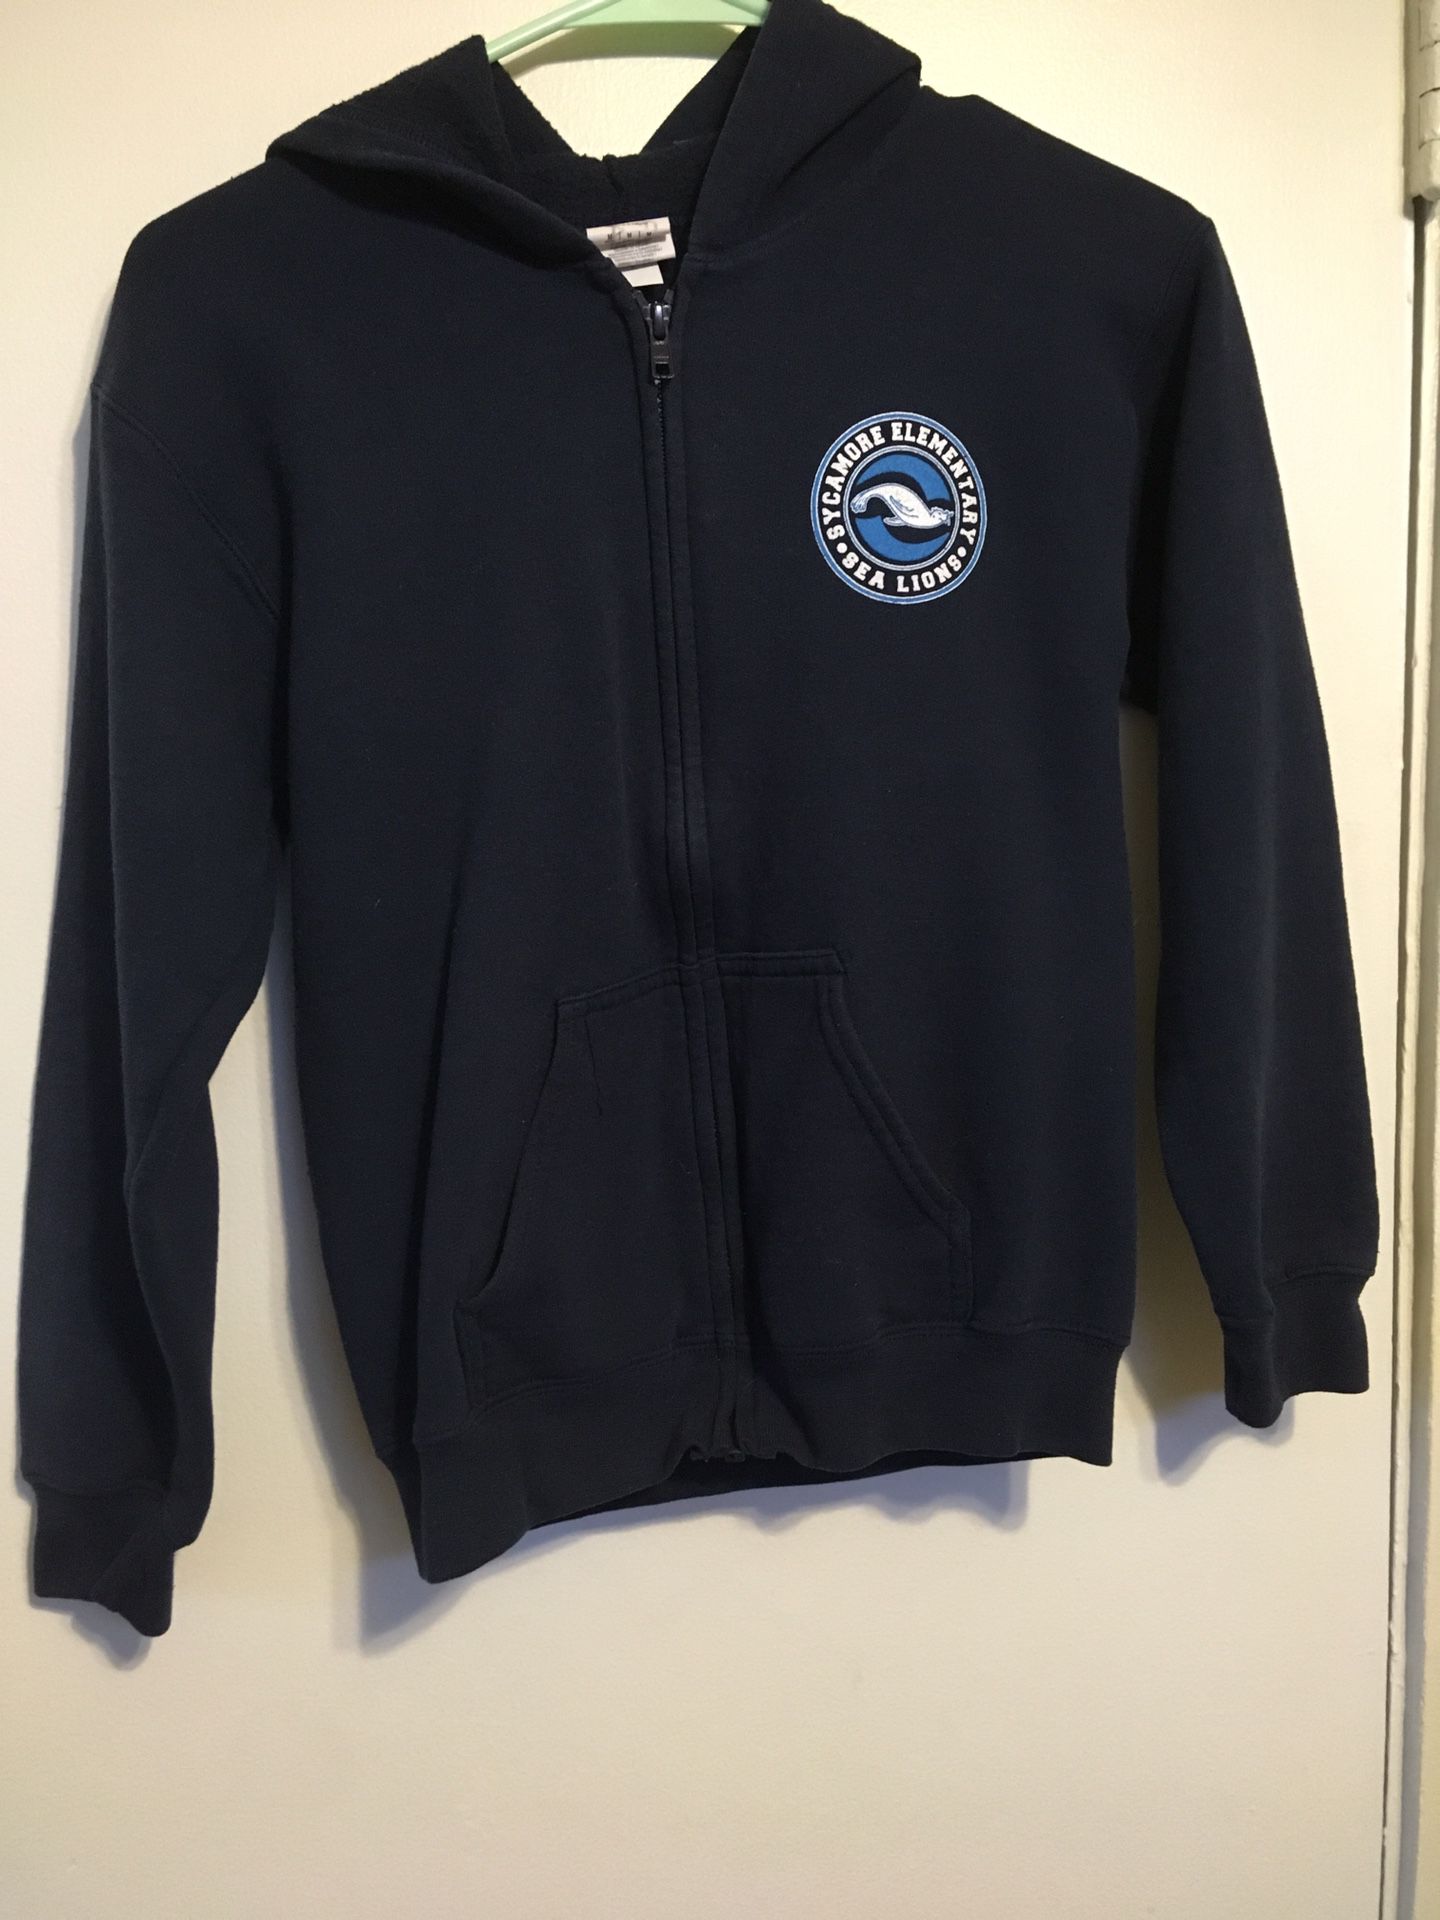 Sycamore elementary sweater